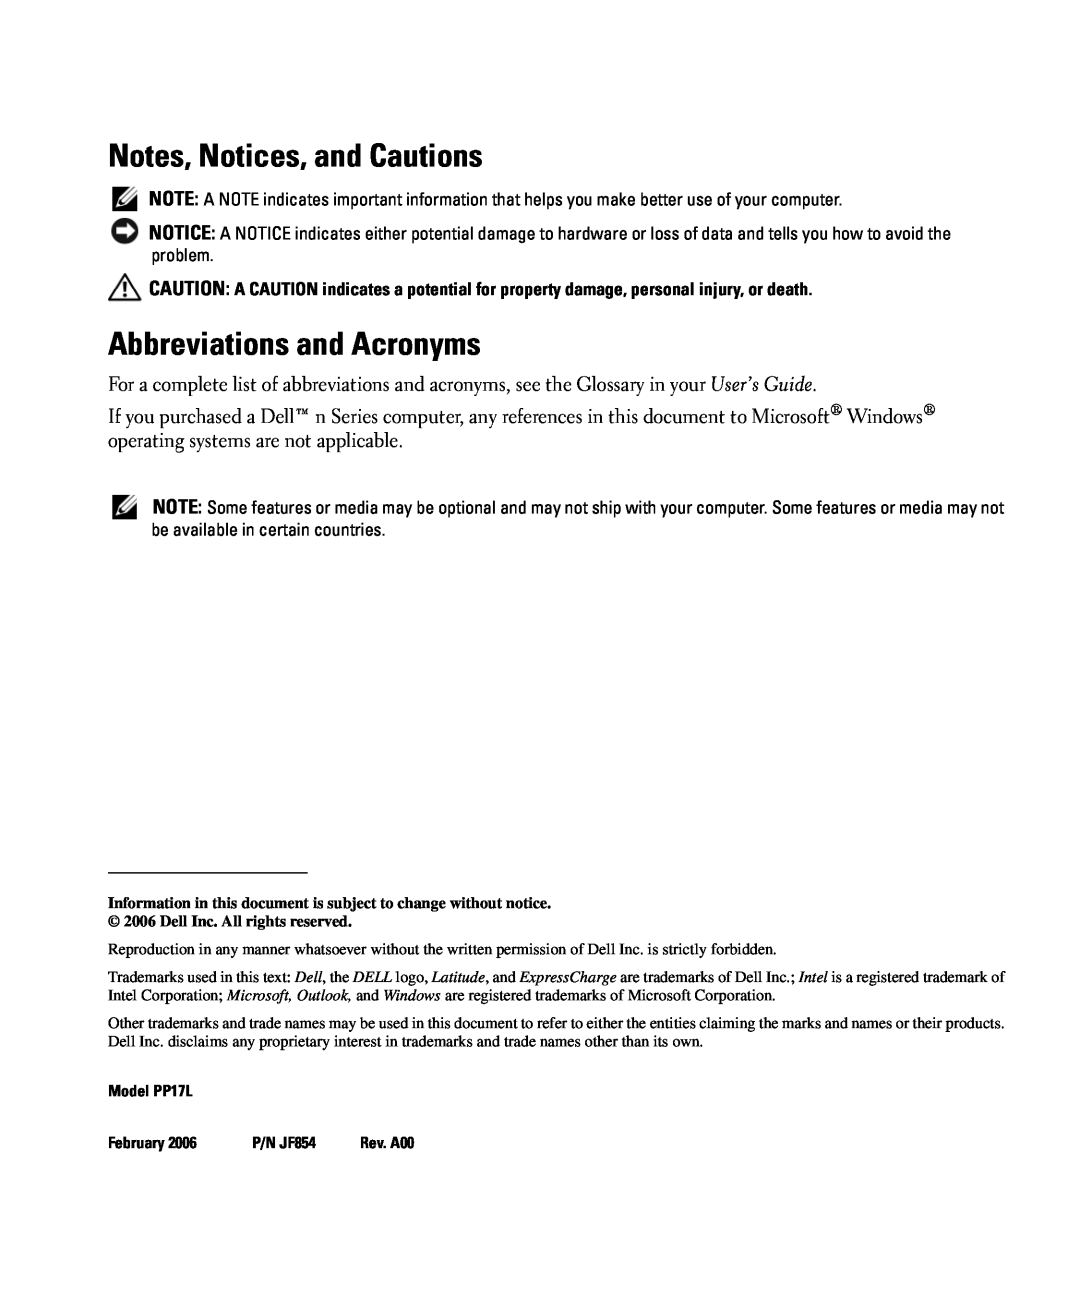 Dell manual Notes, Notices, and Cautions, Abbreviations and Acronyms, Model PP17L, February, P/N JF854 